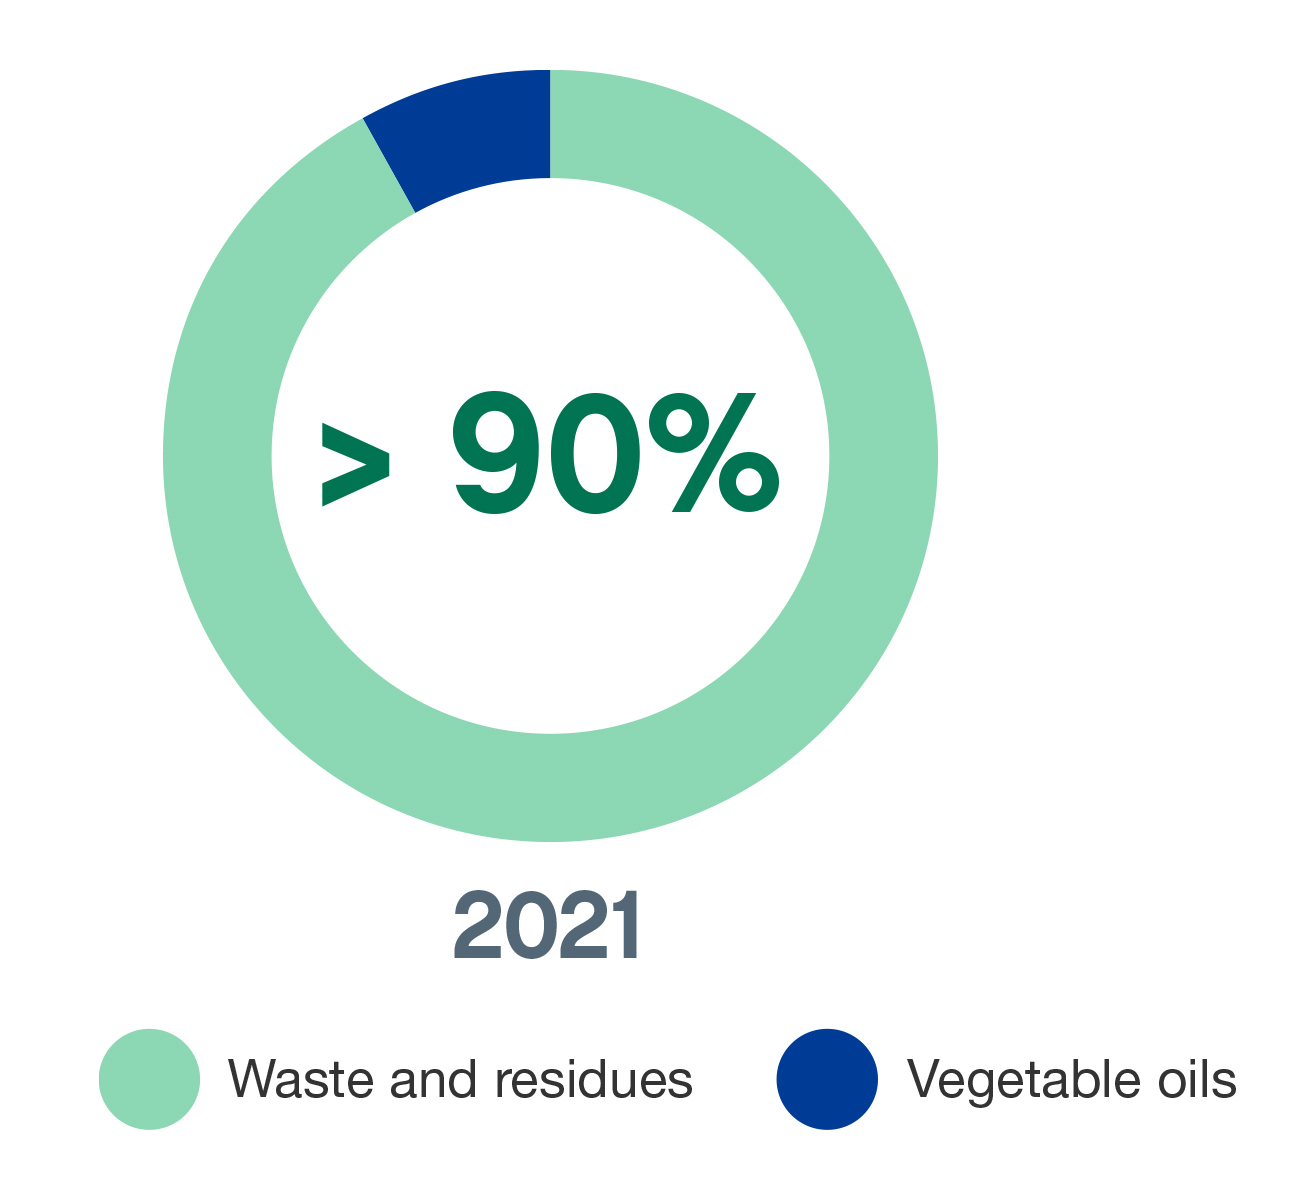 Neste has focused on waste and residues for over a decade. They represent more than 90% of our global renewable raw material inputs.